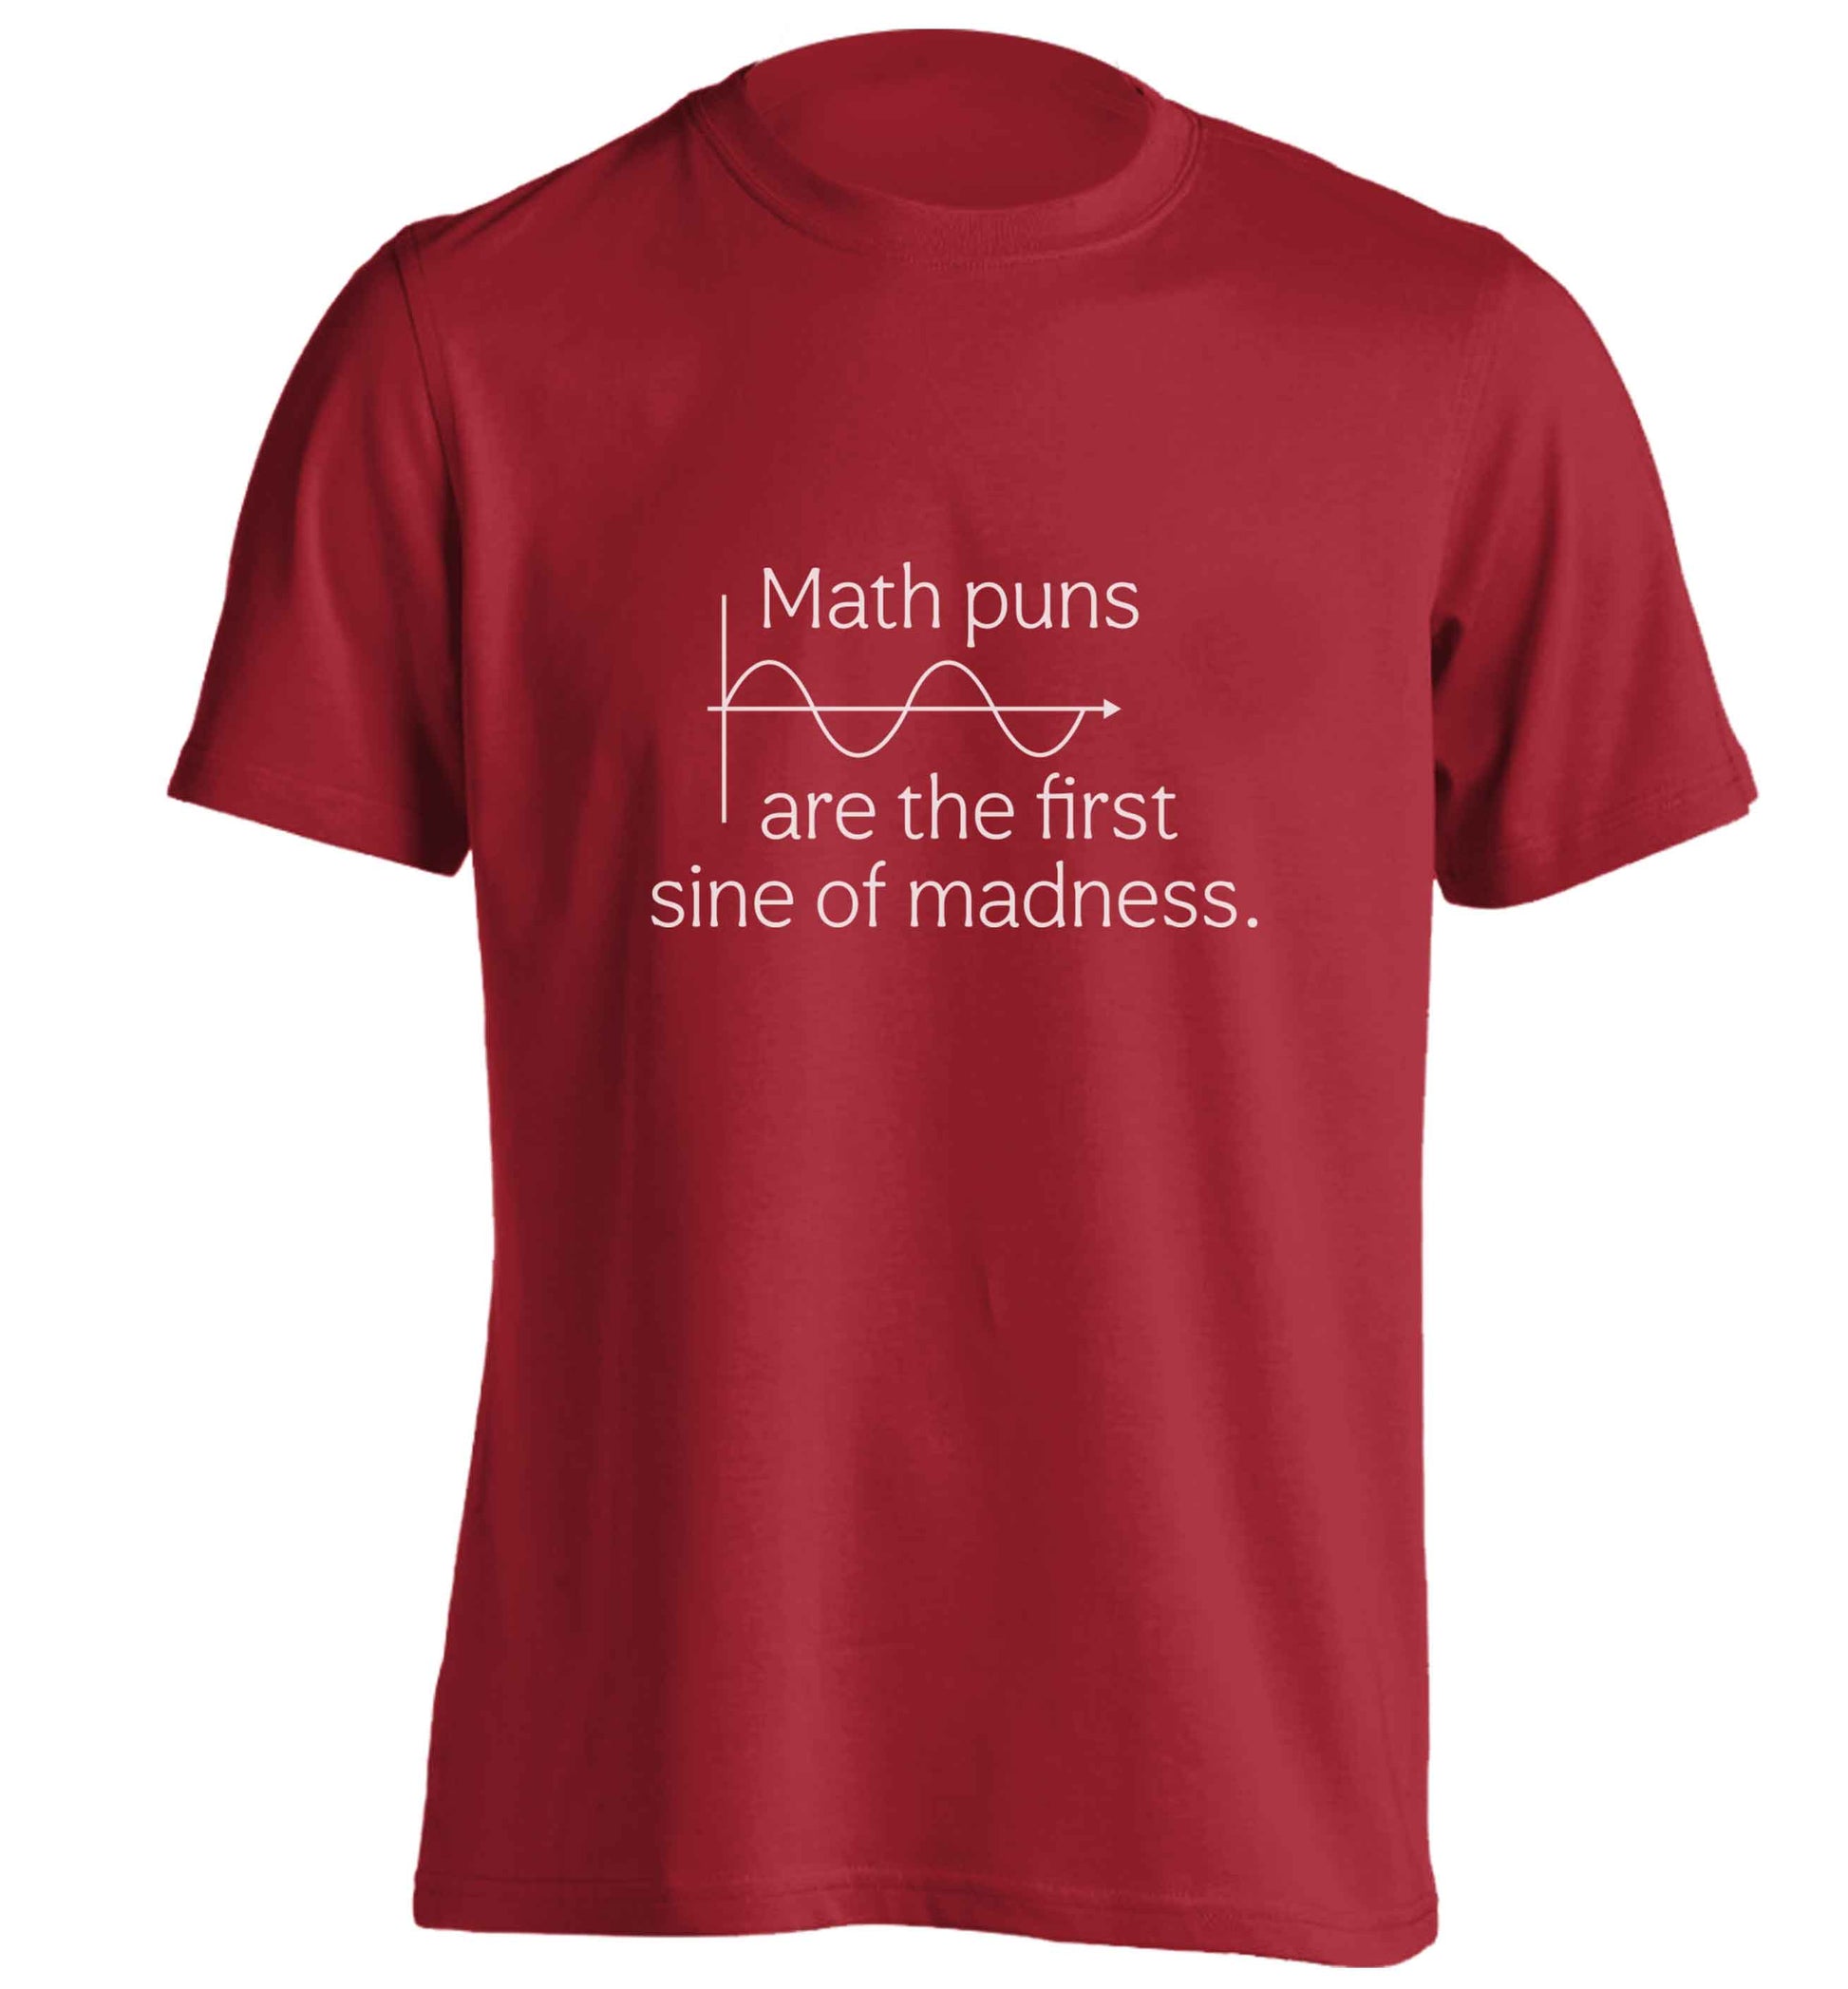 Math puns are the first sine of madness adults unisex red Tshirt 2XL